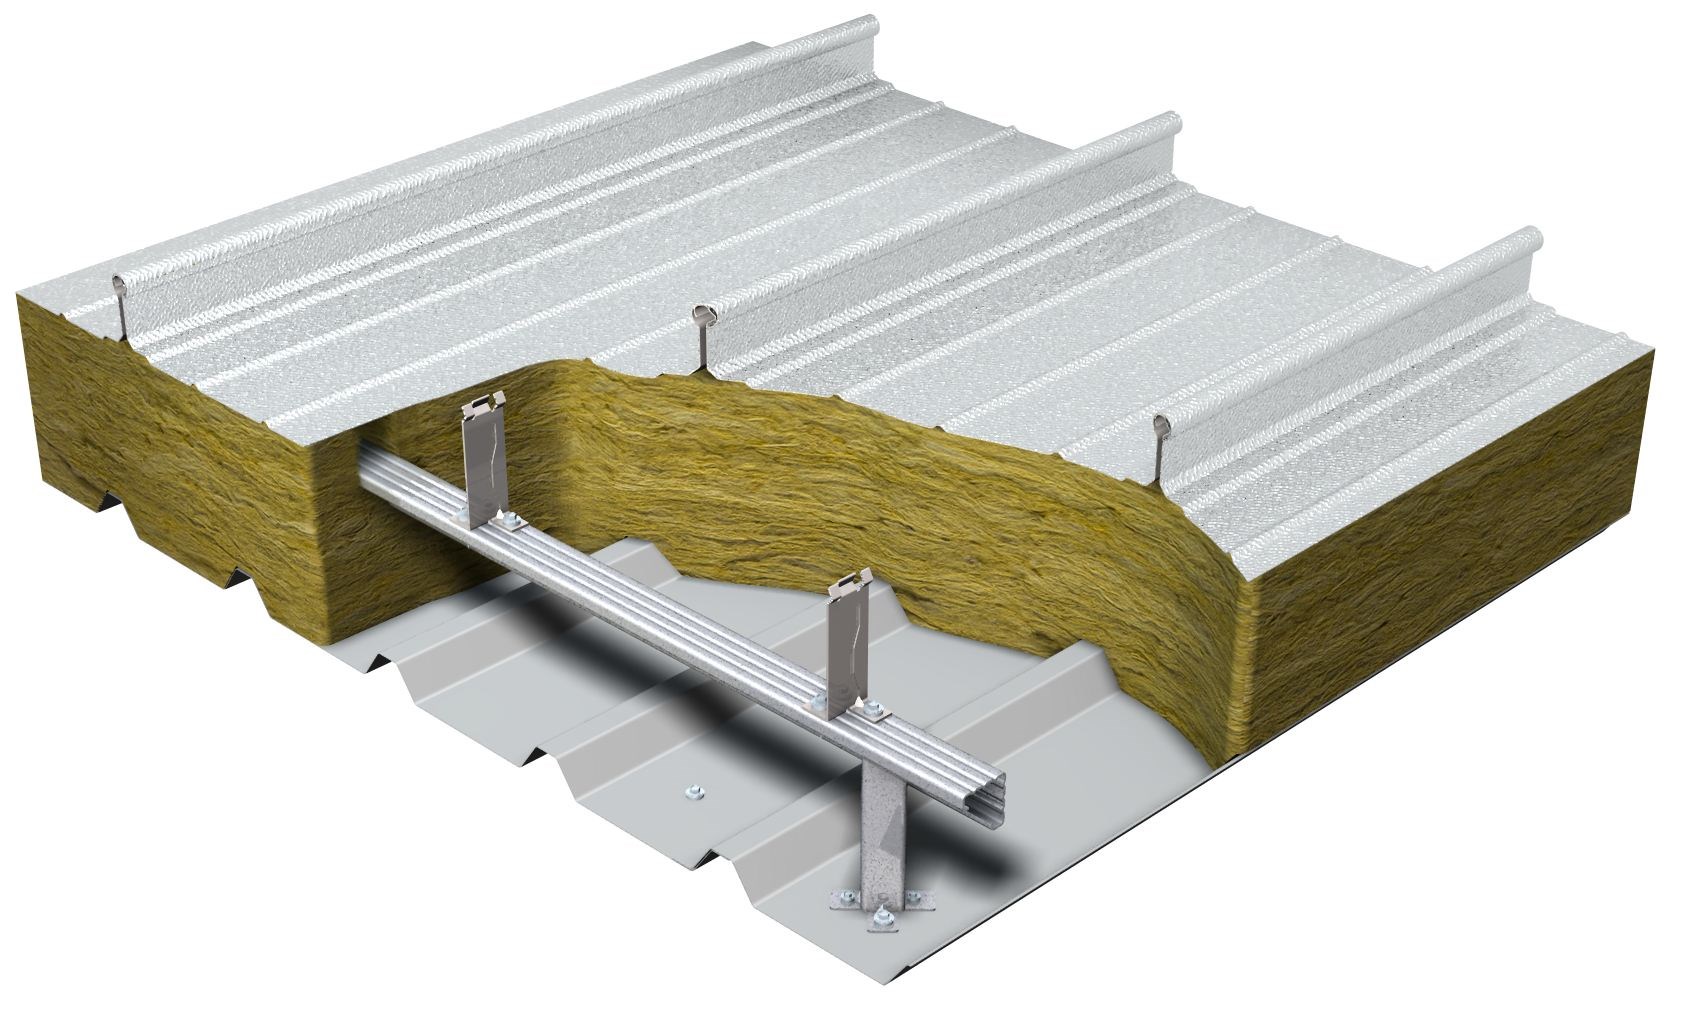 EQC Seam - standing seam roof systems - accomodates complex roofing designs and bespoke standing seam roof requirements